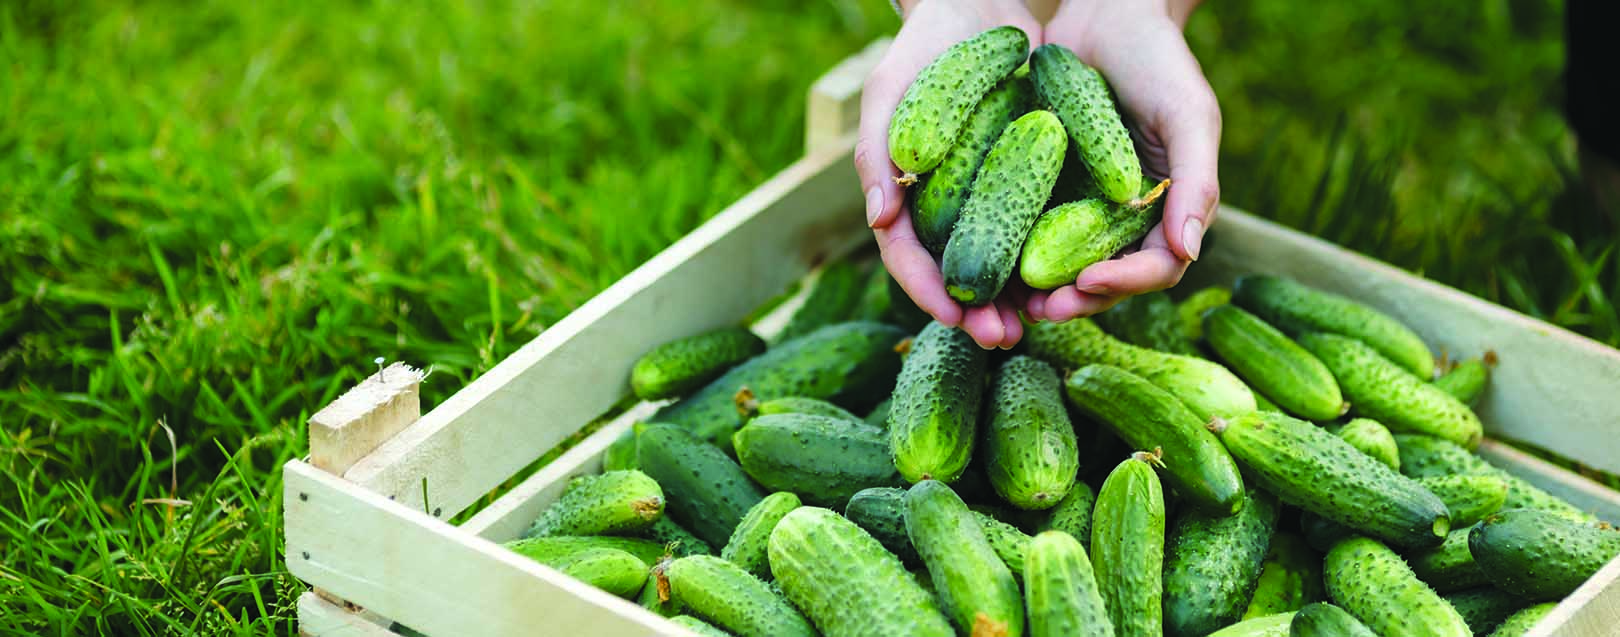 Gherkins - Cool Fruit, Cooler Gains March 2018 issue